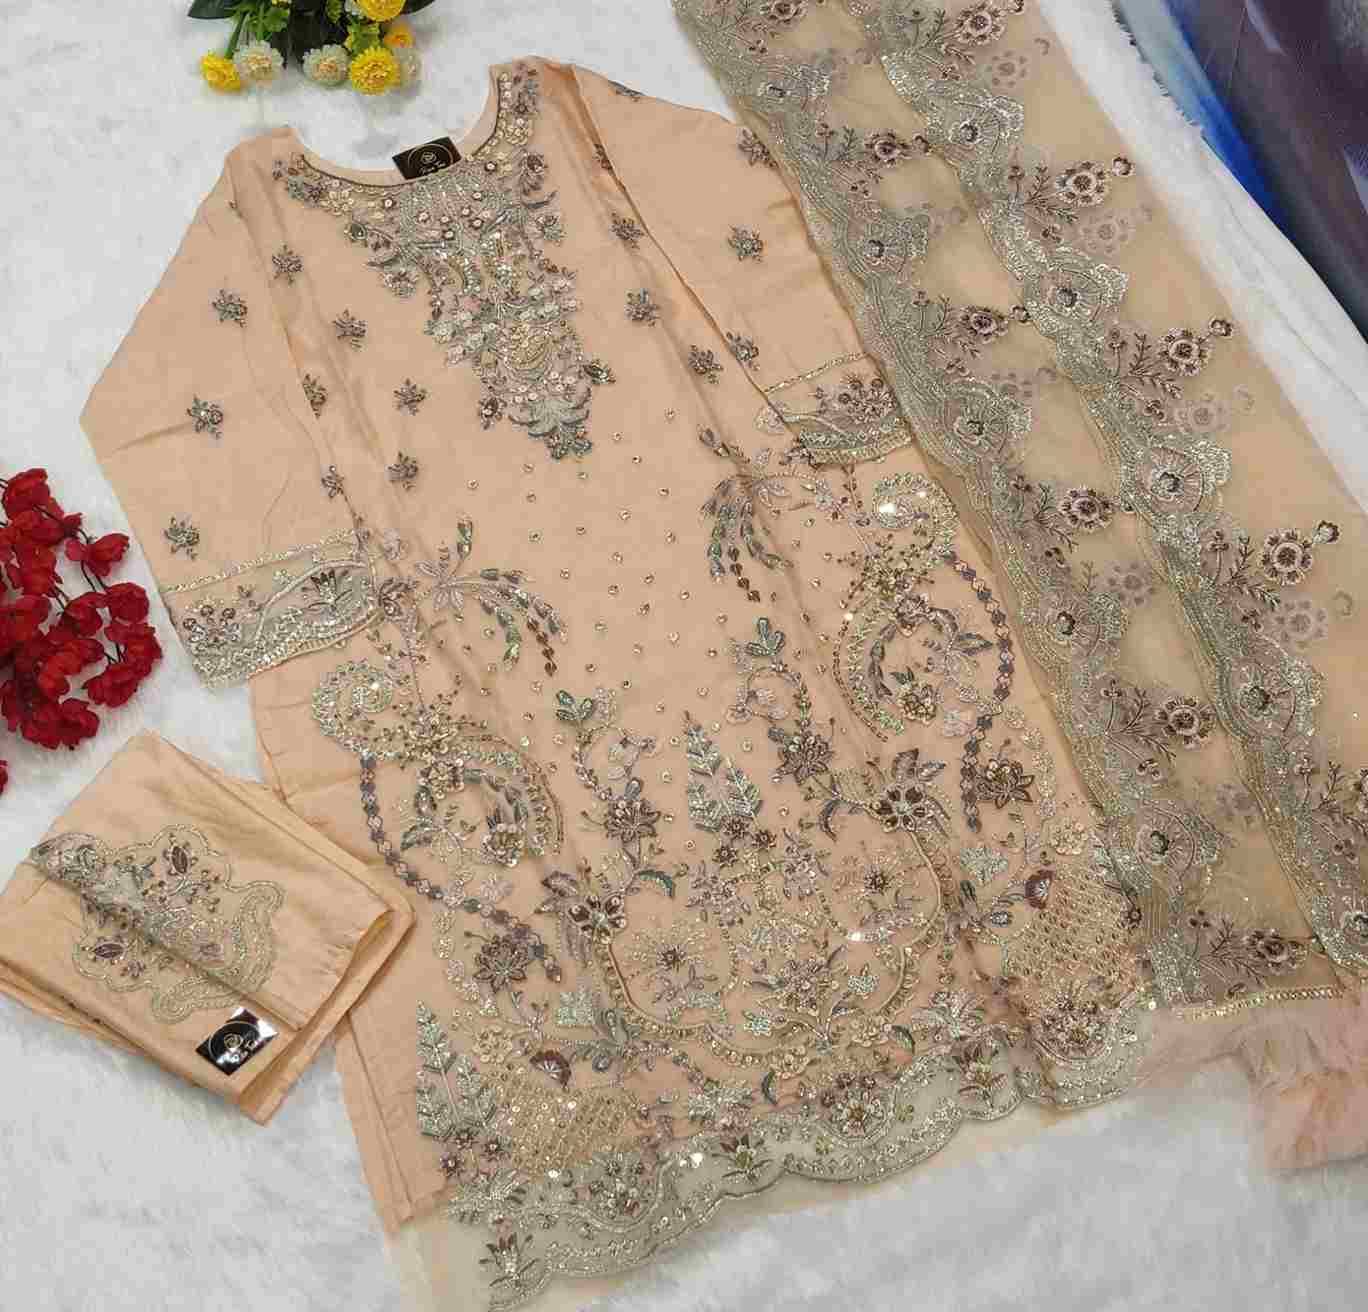 Rose Tex 138 Colours By Rose Tex 138-A To 138-D Series Beautiful Stylish Pakistani Suits Fancy Colorful Casual Wear & Ethnic Wear & Ready To Wear Pure Organza Dresses At Wholesale Price